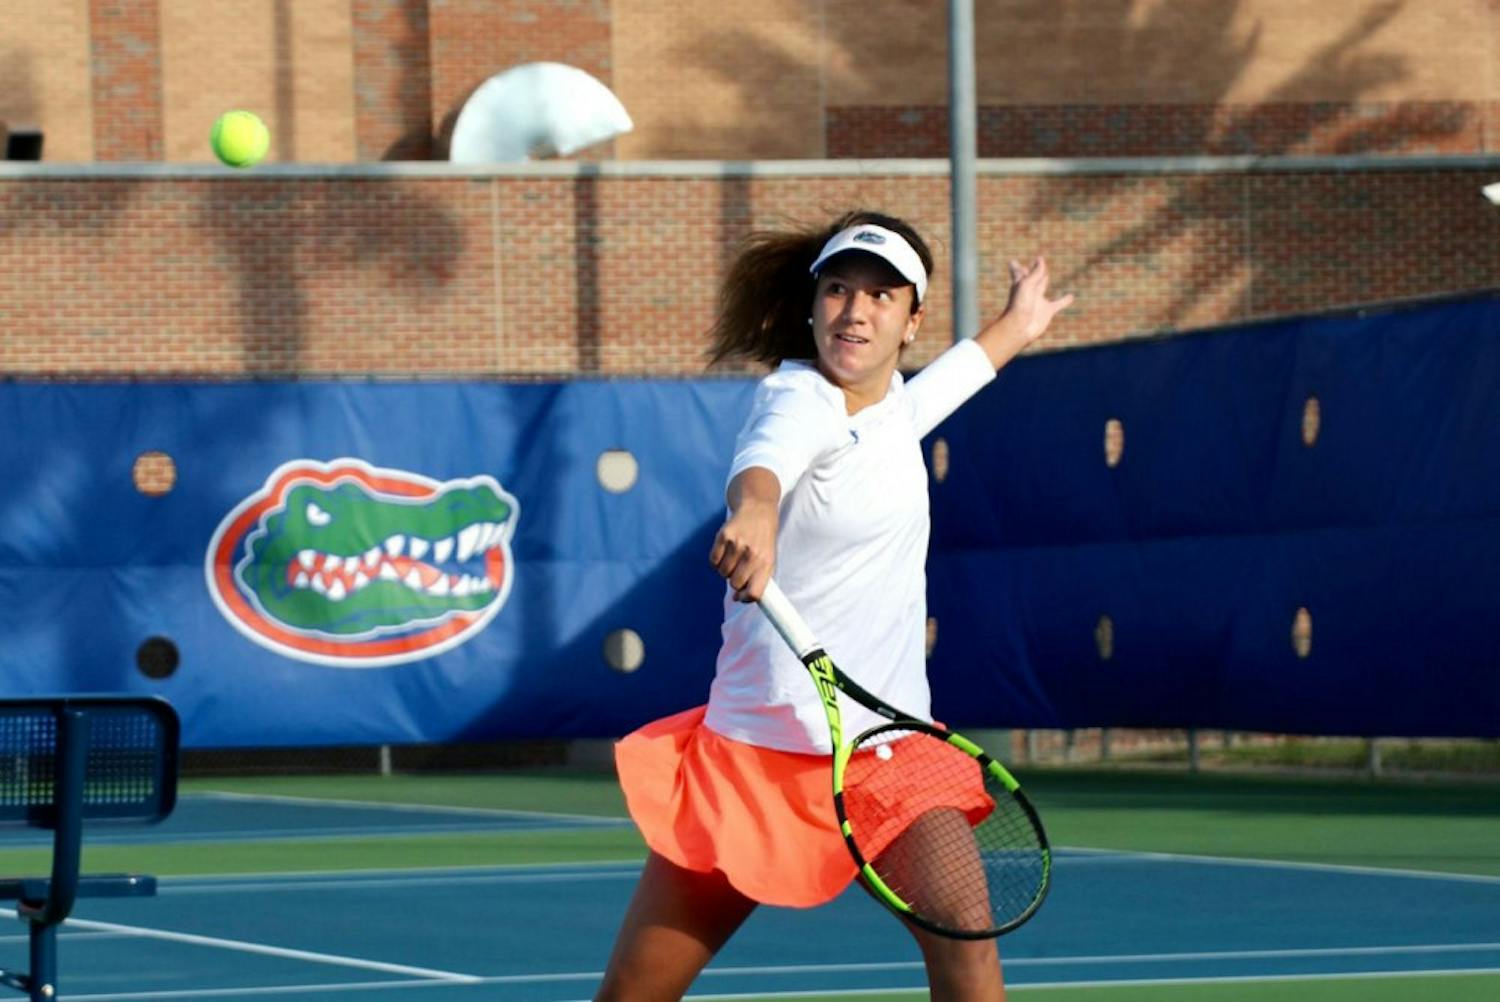 Senior Anna Danilina and the No. 3 Gators swept Cal State Fullerton Saturday afternoon in their first dual-match meet of the season. “Everyone was a bit nervous,” Danilina said. “But I think we handled it well."